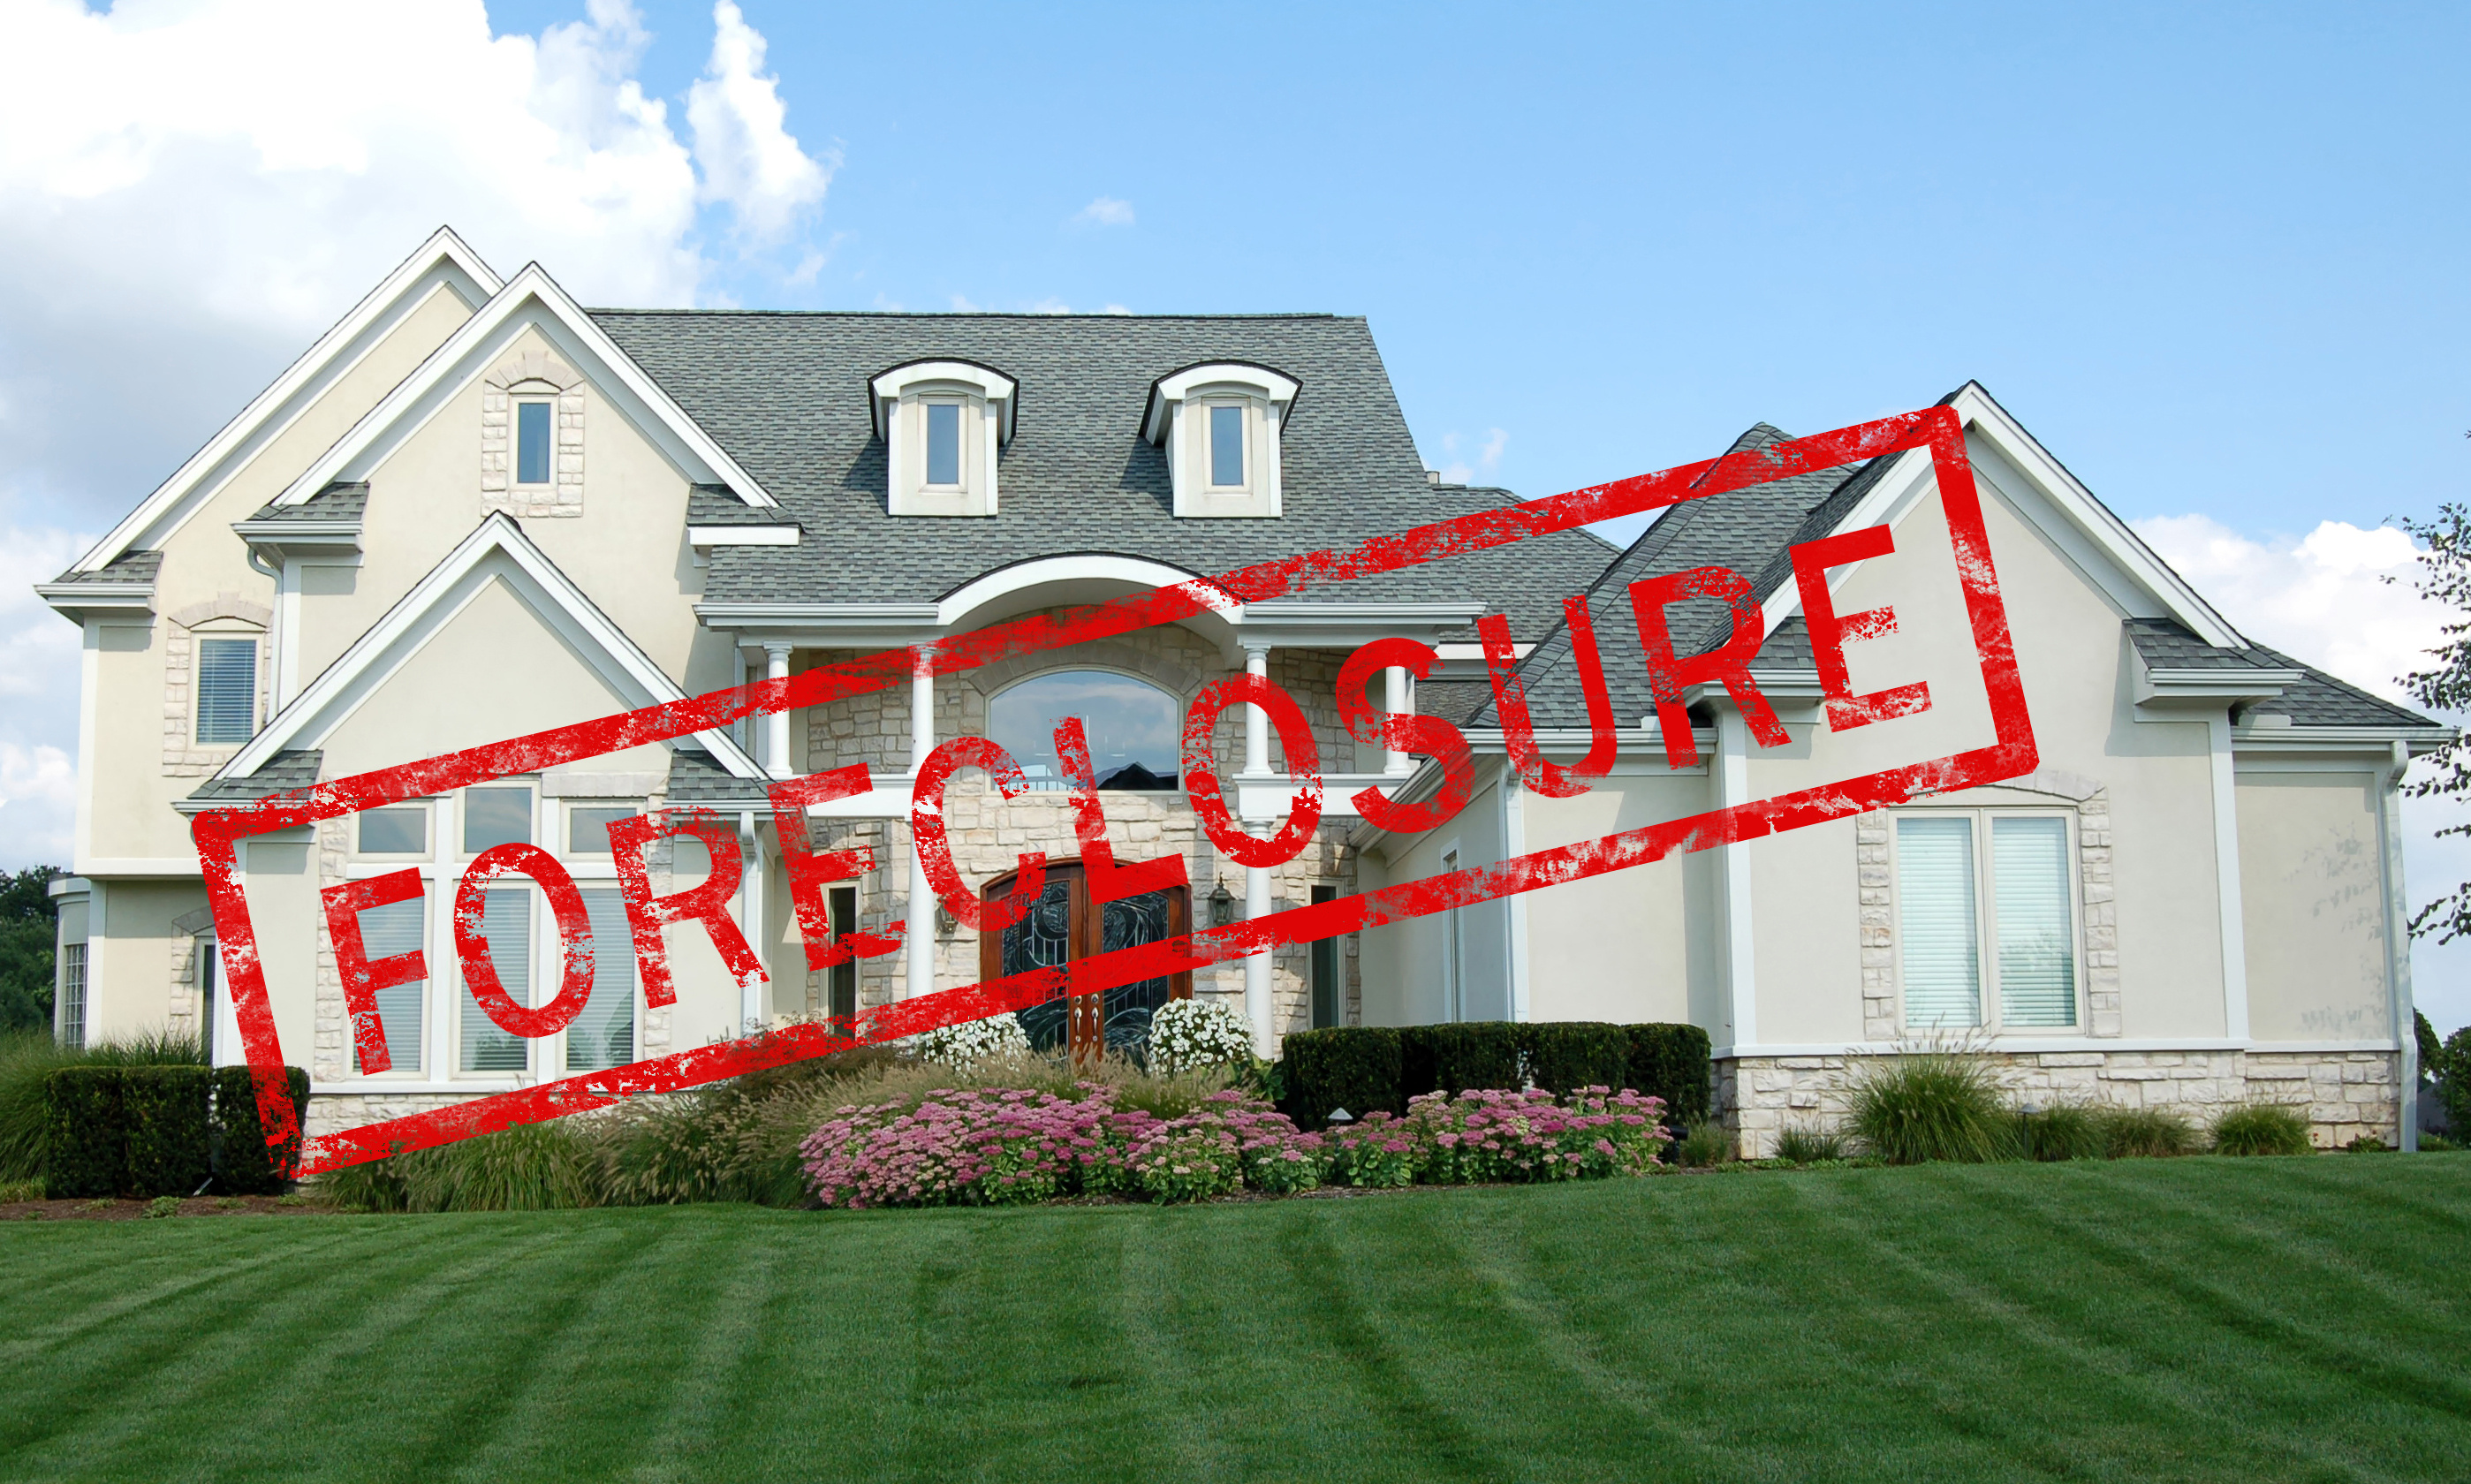 Call Brent Turney Inc. to order valuations on Tulsa foreclosures